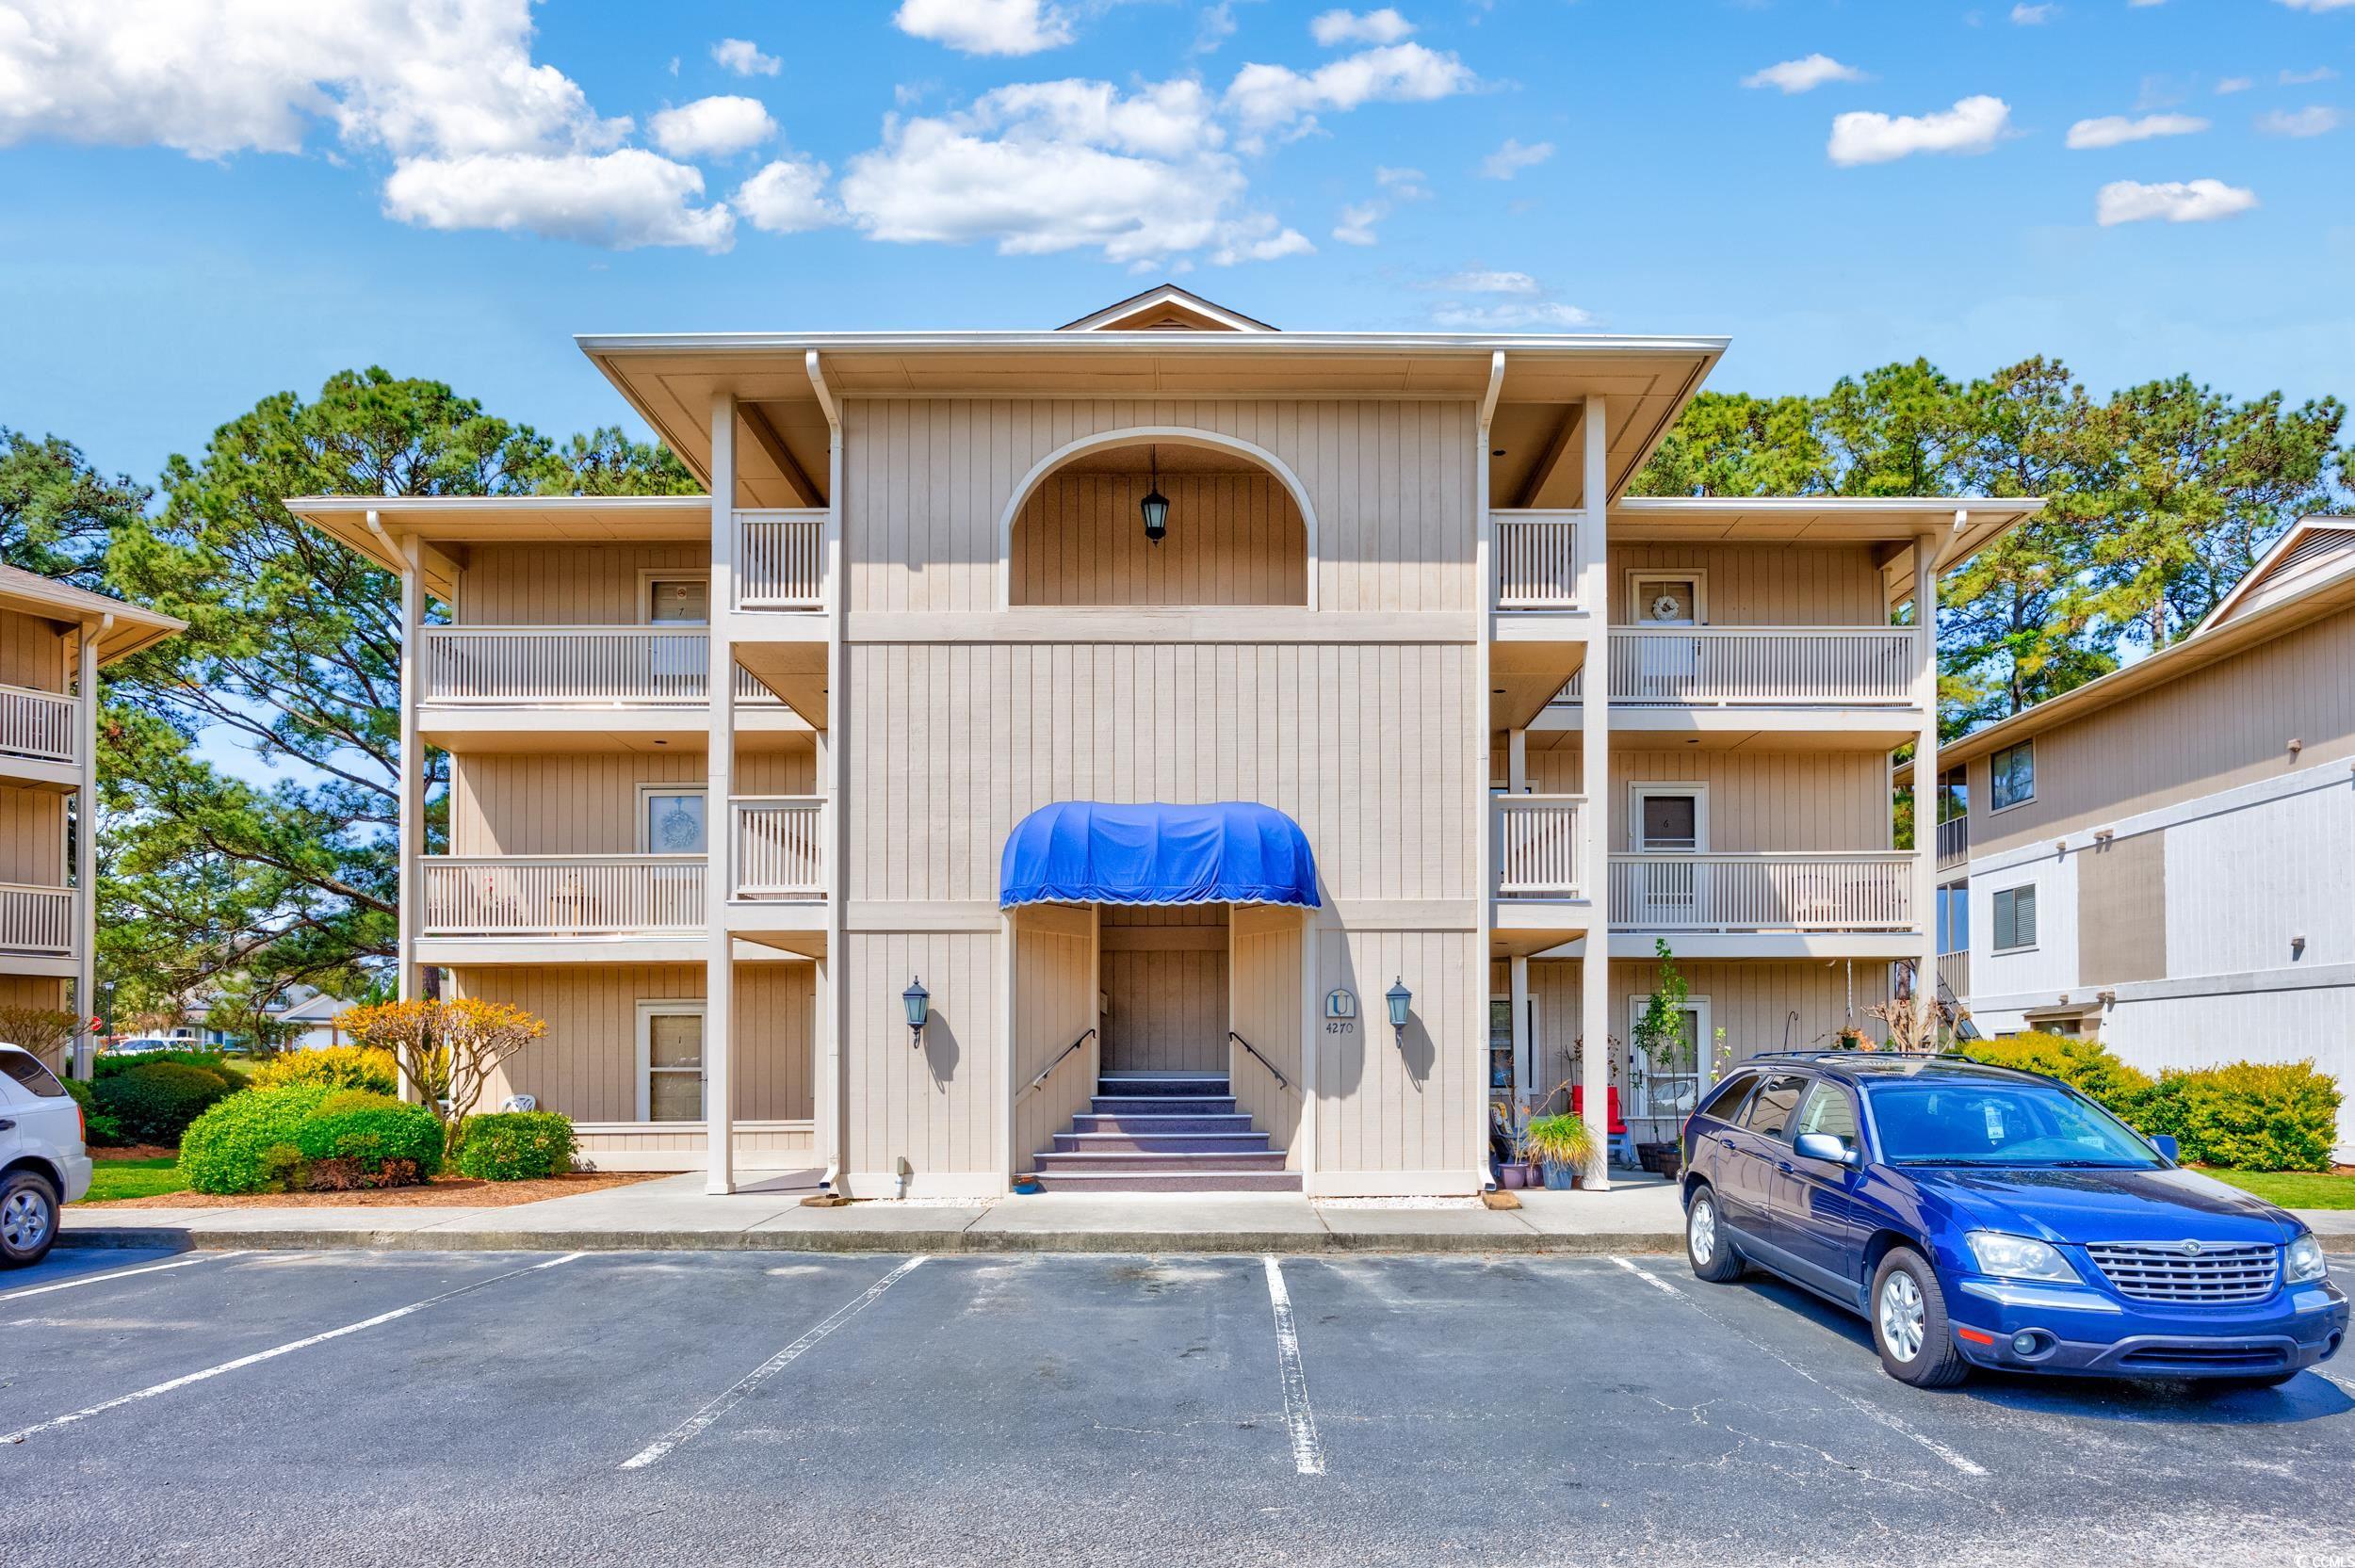 great first floor unit at cypress bay. this unit has new flooring, recently painted, new granite countertops, backsplash, sink ,hvac replaced in 2022 and the roof was replaced in 2018. very well maintained. cypress bay is close to cvs, food lion, lowe's food, waterfront restaurants, calabash and only minutes to the beach and highway 22.